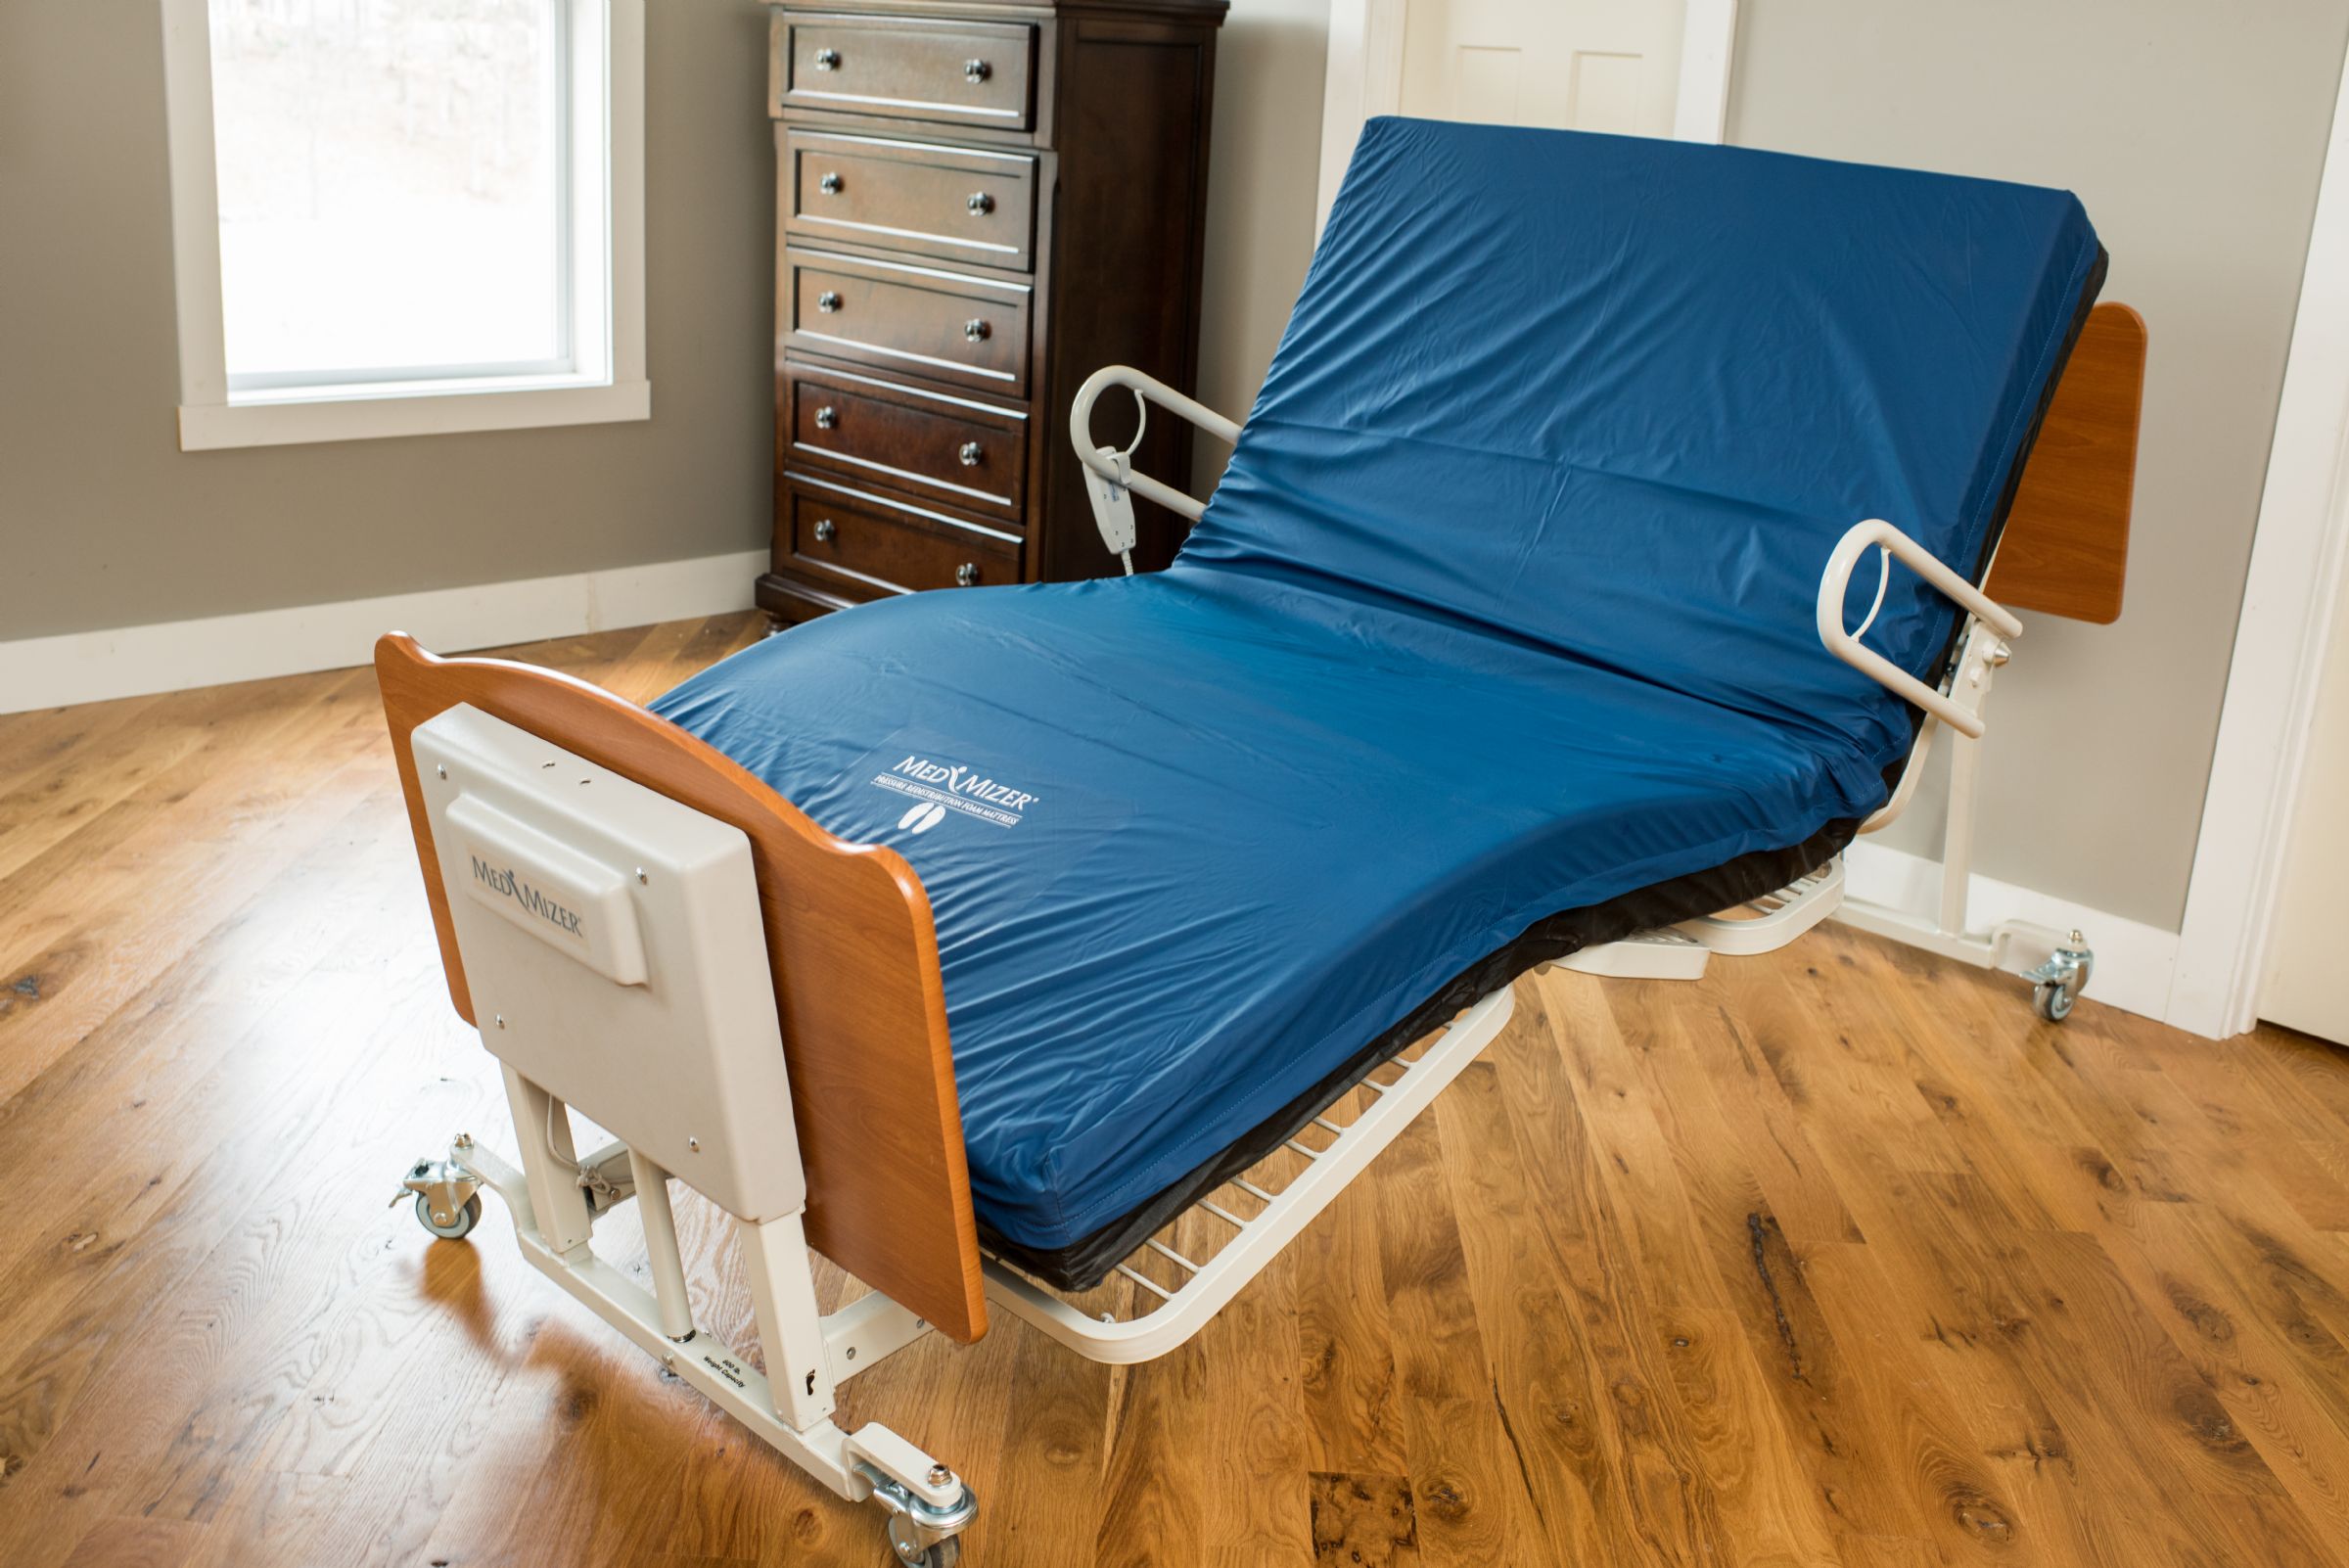 Heavy Duty Bariatric Hospital Beds For Sale